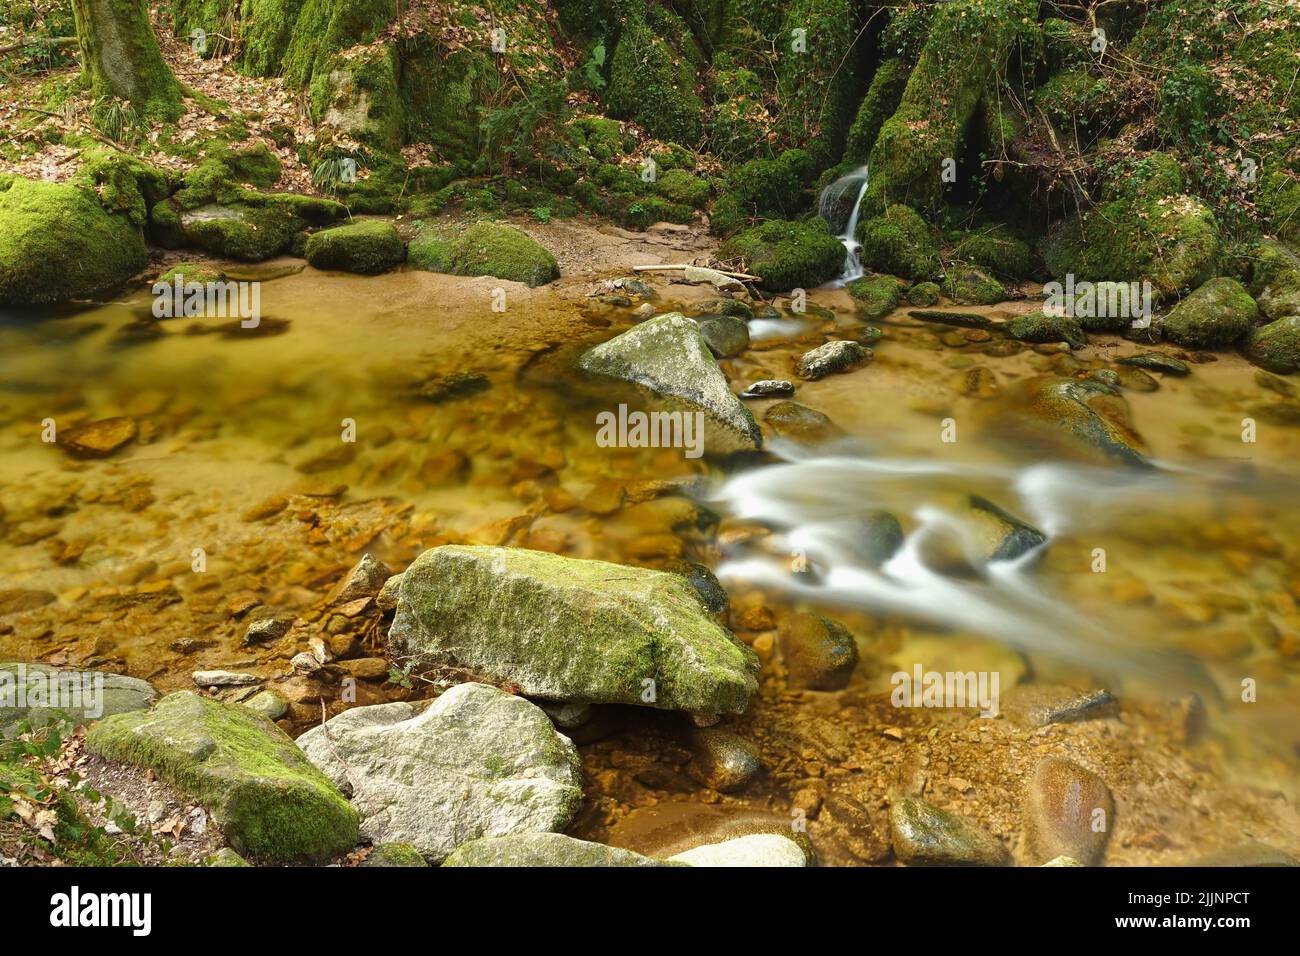 A beautiful small stream with an orange color flows through the Black Forest, Germany. Hiking at touristic nature and landscape routes and paths. Stock Photo